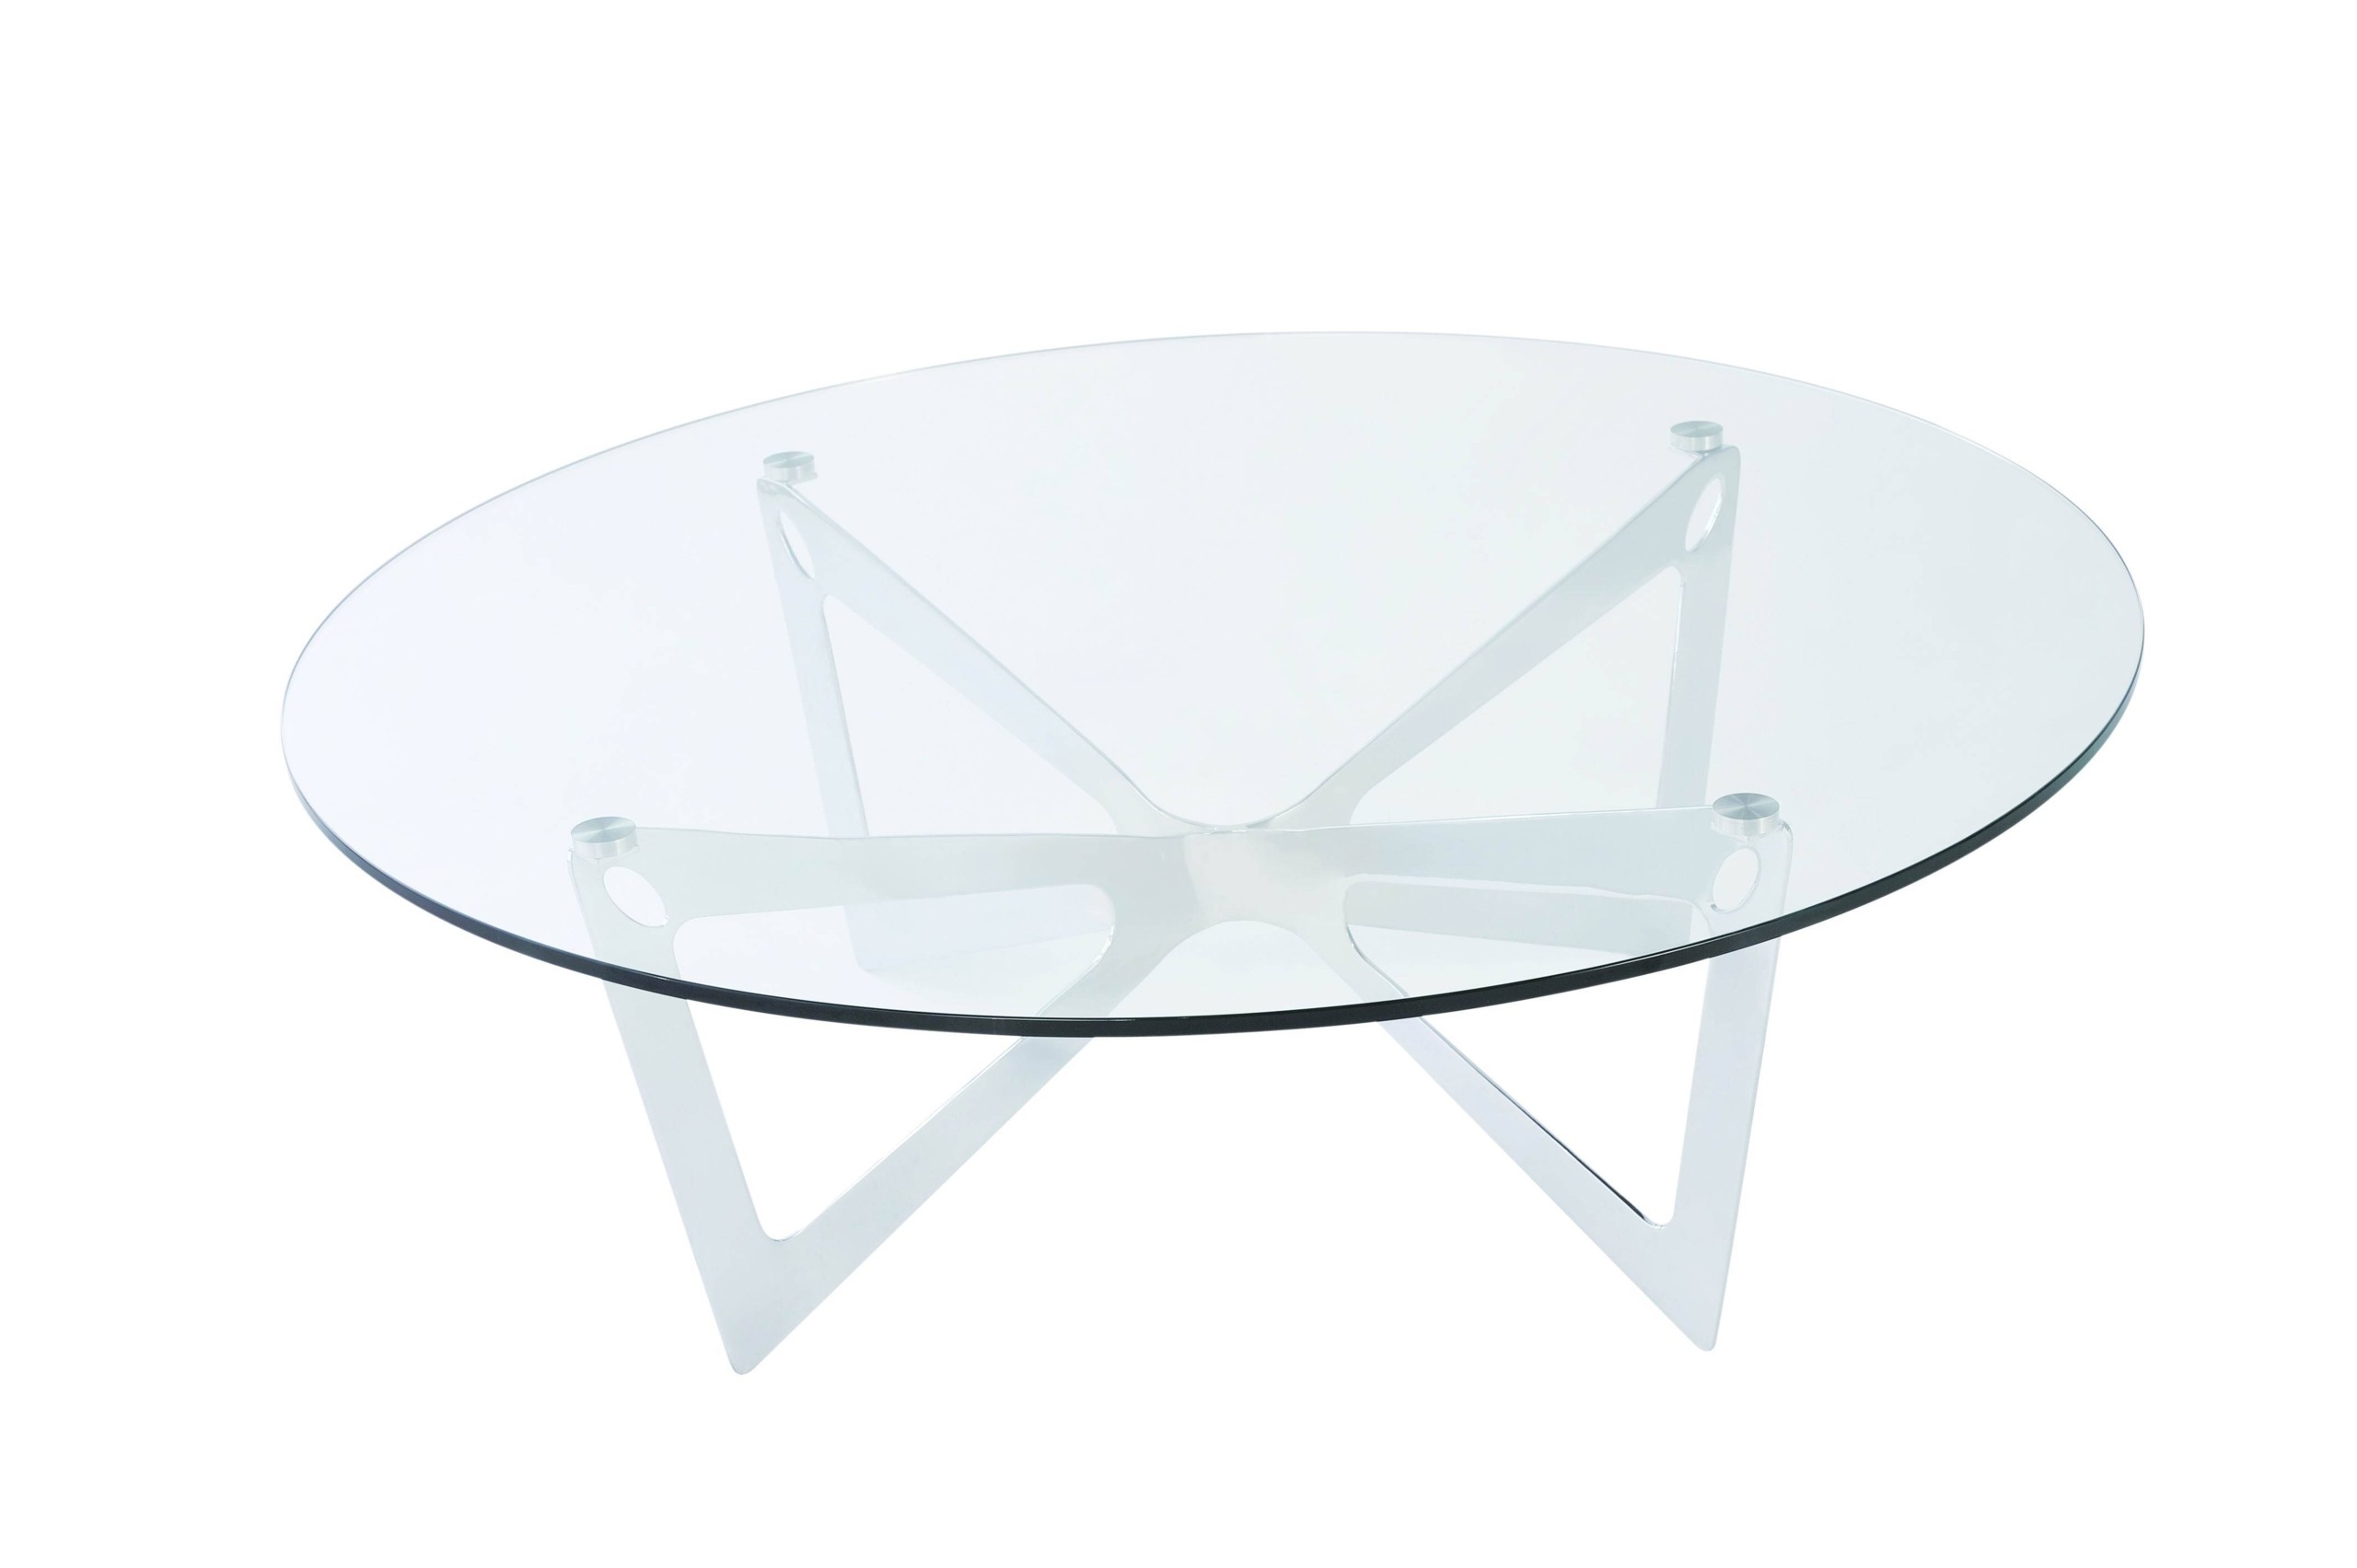 30 ideas of metal and glass coffee tables